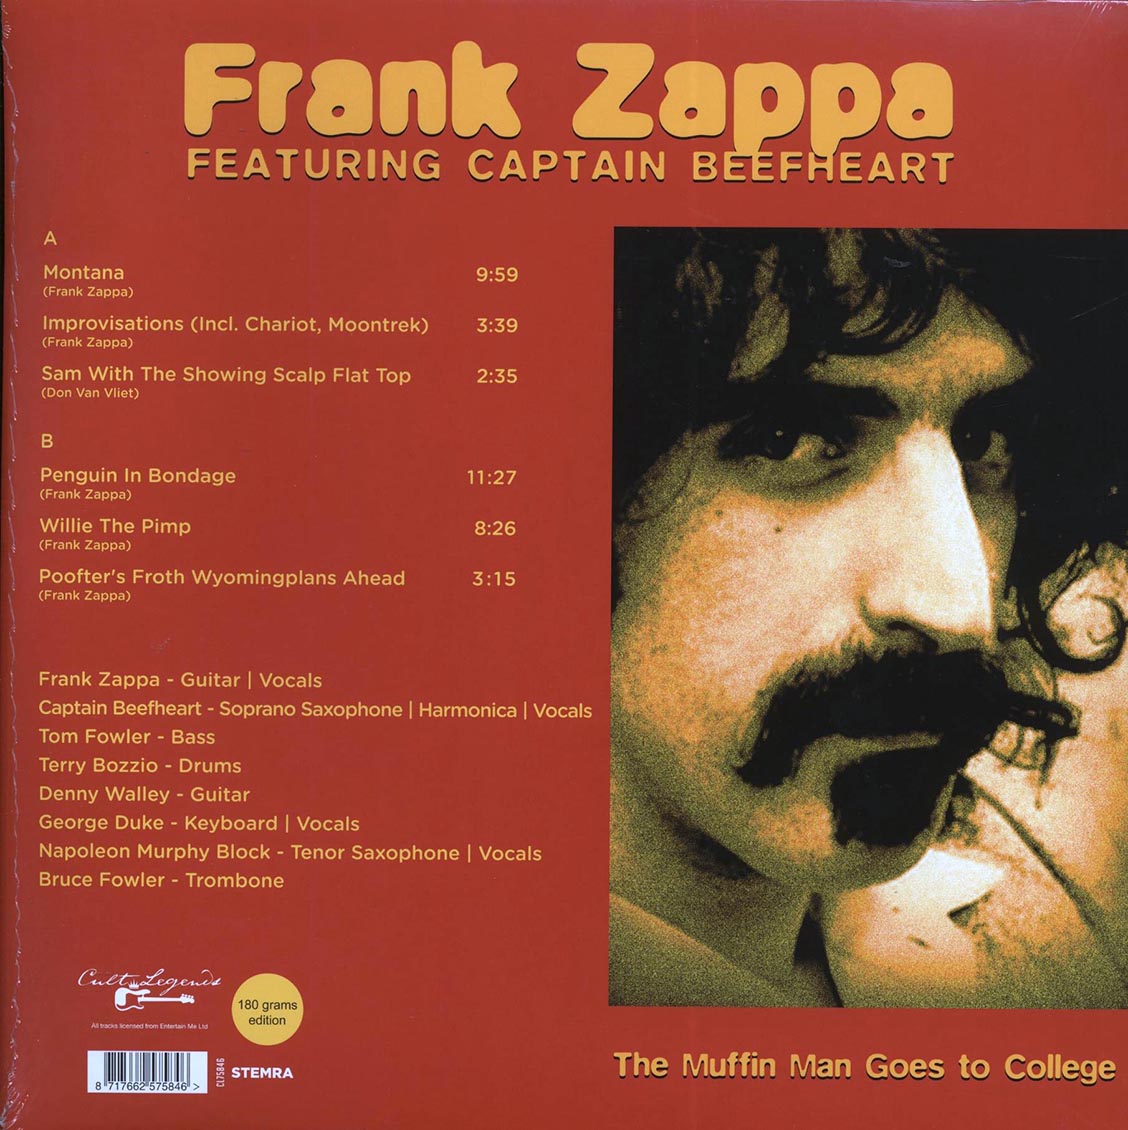 Frank Zappa, Captain Beefheart - The Muffin Man Goes To College: Providence College, RI, April 26th 1975